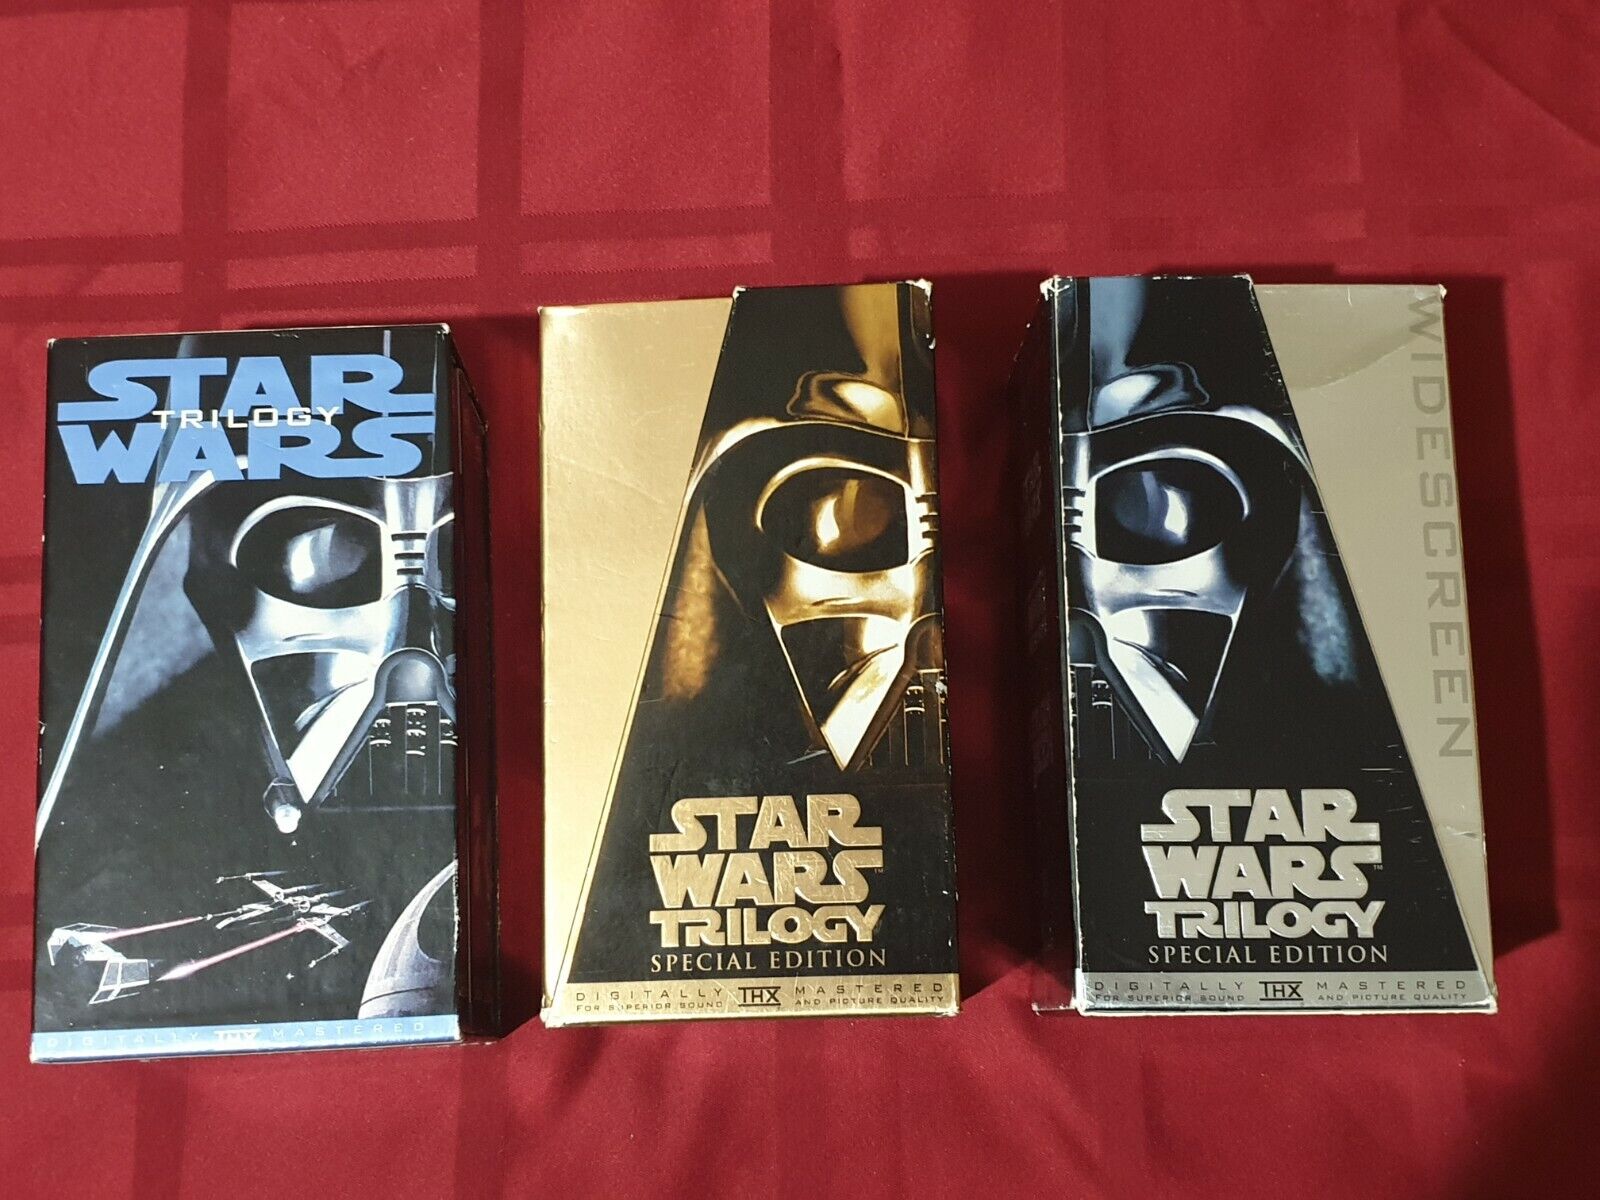 STAR WARS TRILOGY 1995, 1997 Gold & 1997 Silver Widescreen Special Edition